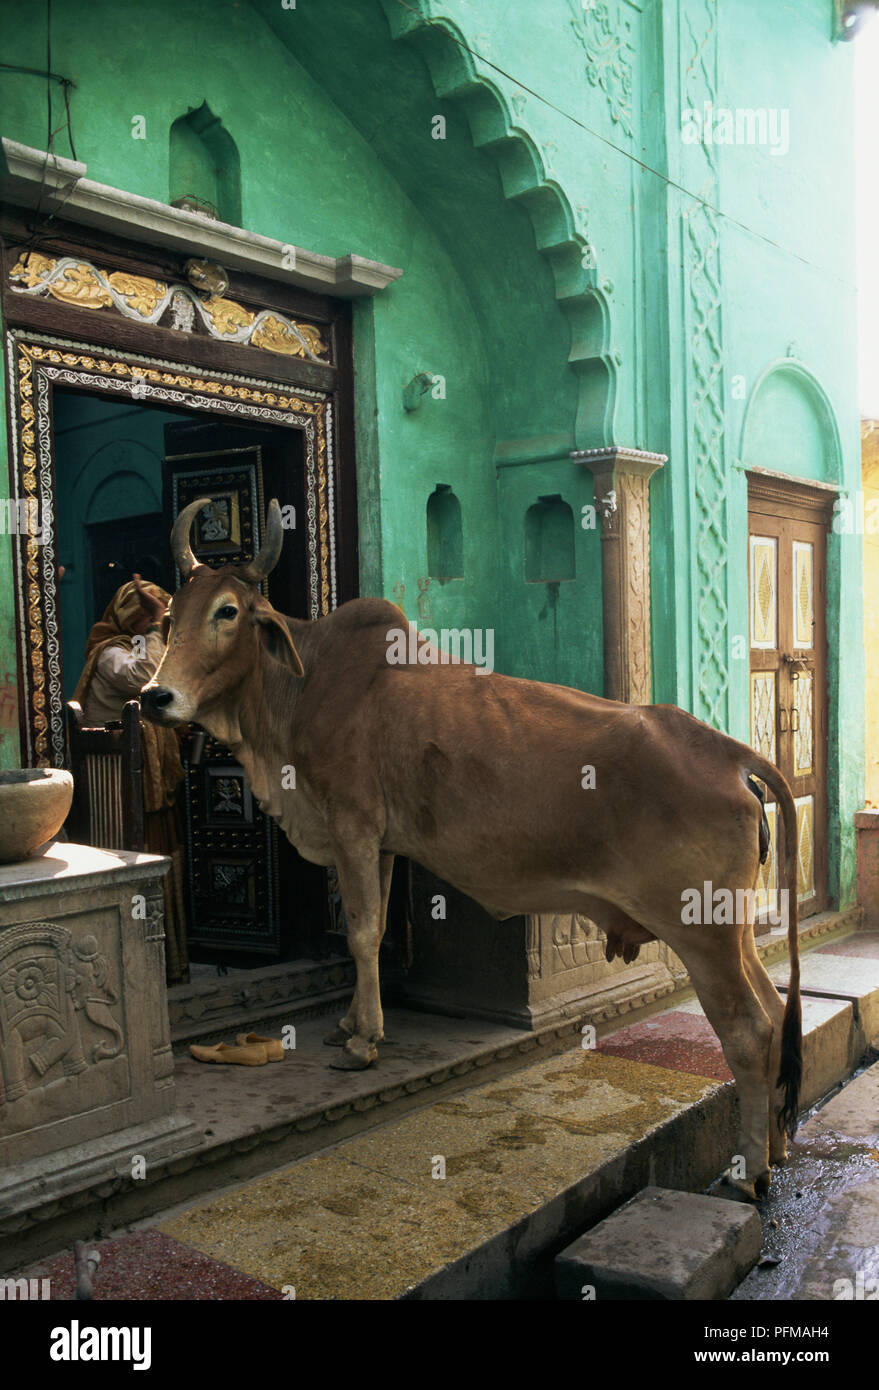 India, Nandgaon, long horned cow entering building where Krishna lived with foster parents Nand and Yashoda after his escape from Gokul and the evil Kamsa, turquoise painted walls, steps leading to ornate black, silver and gold doorway. Stock Photo